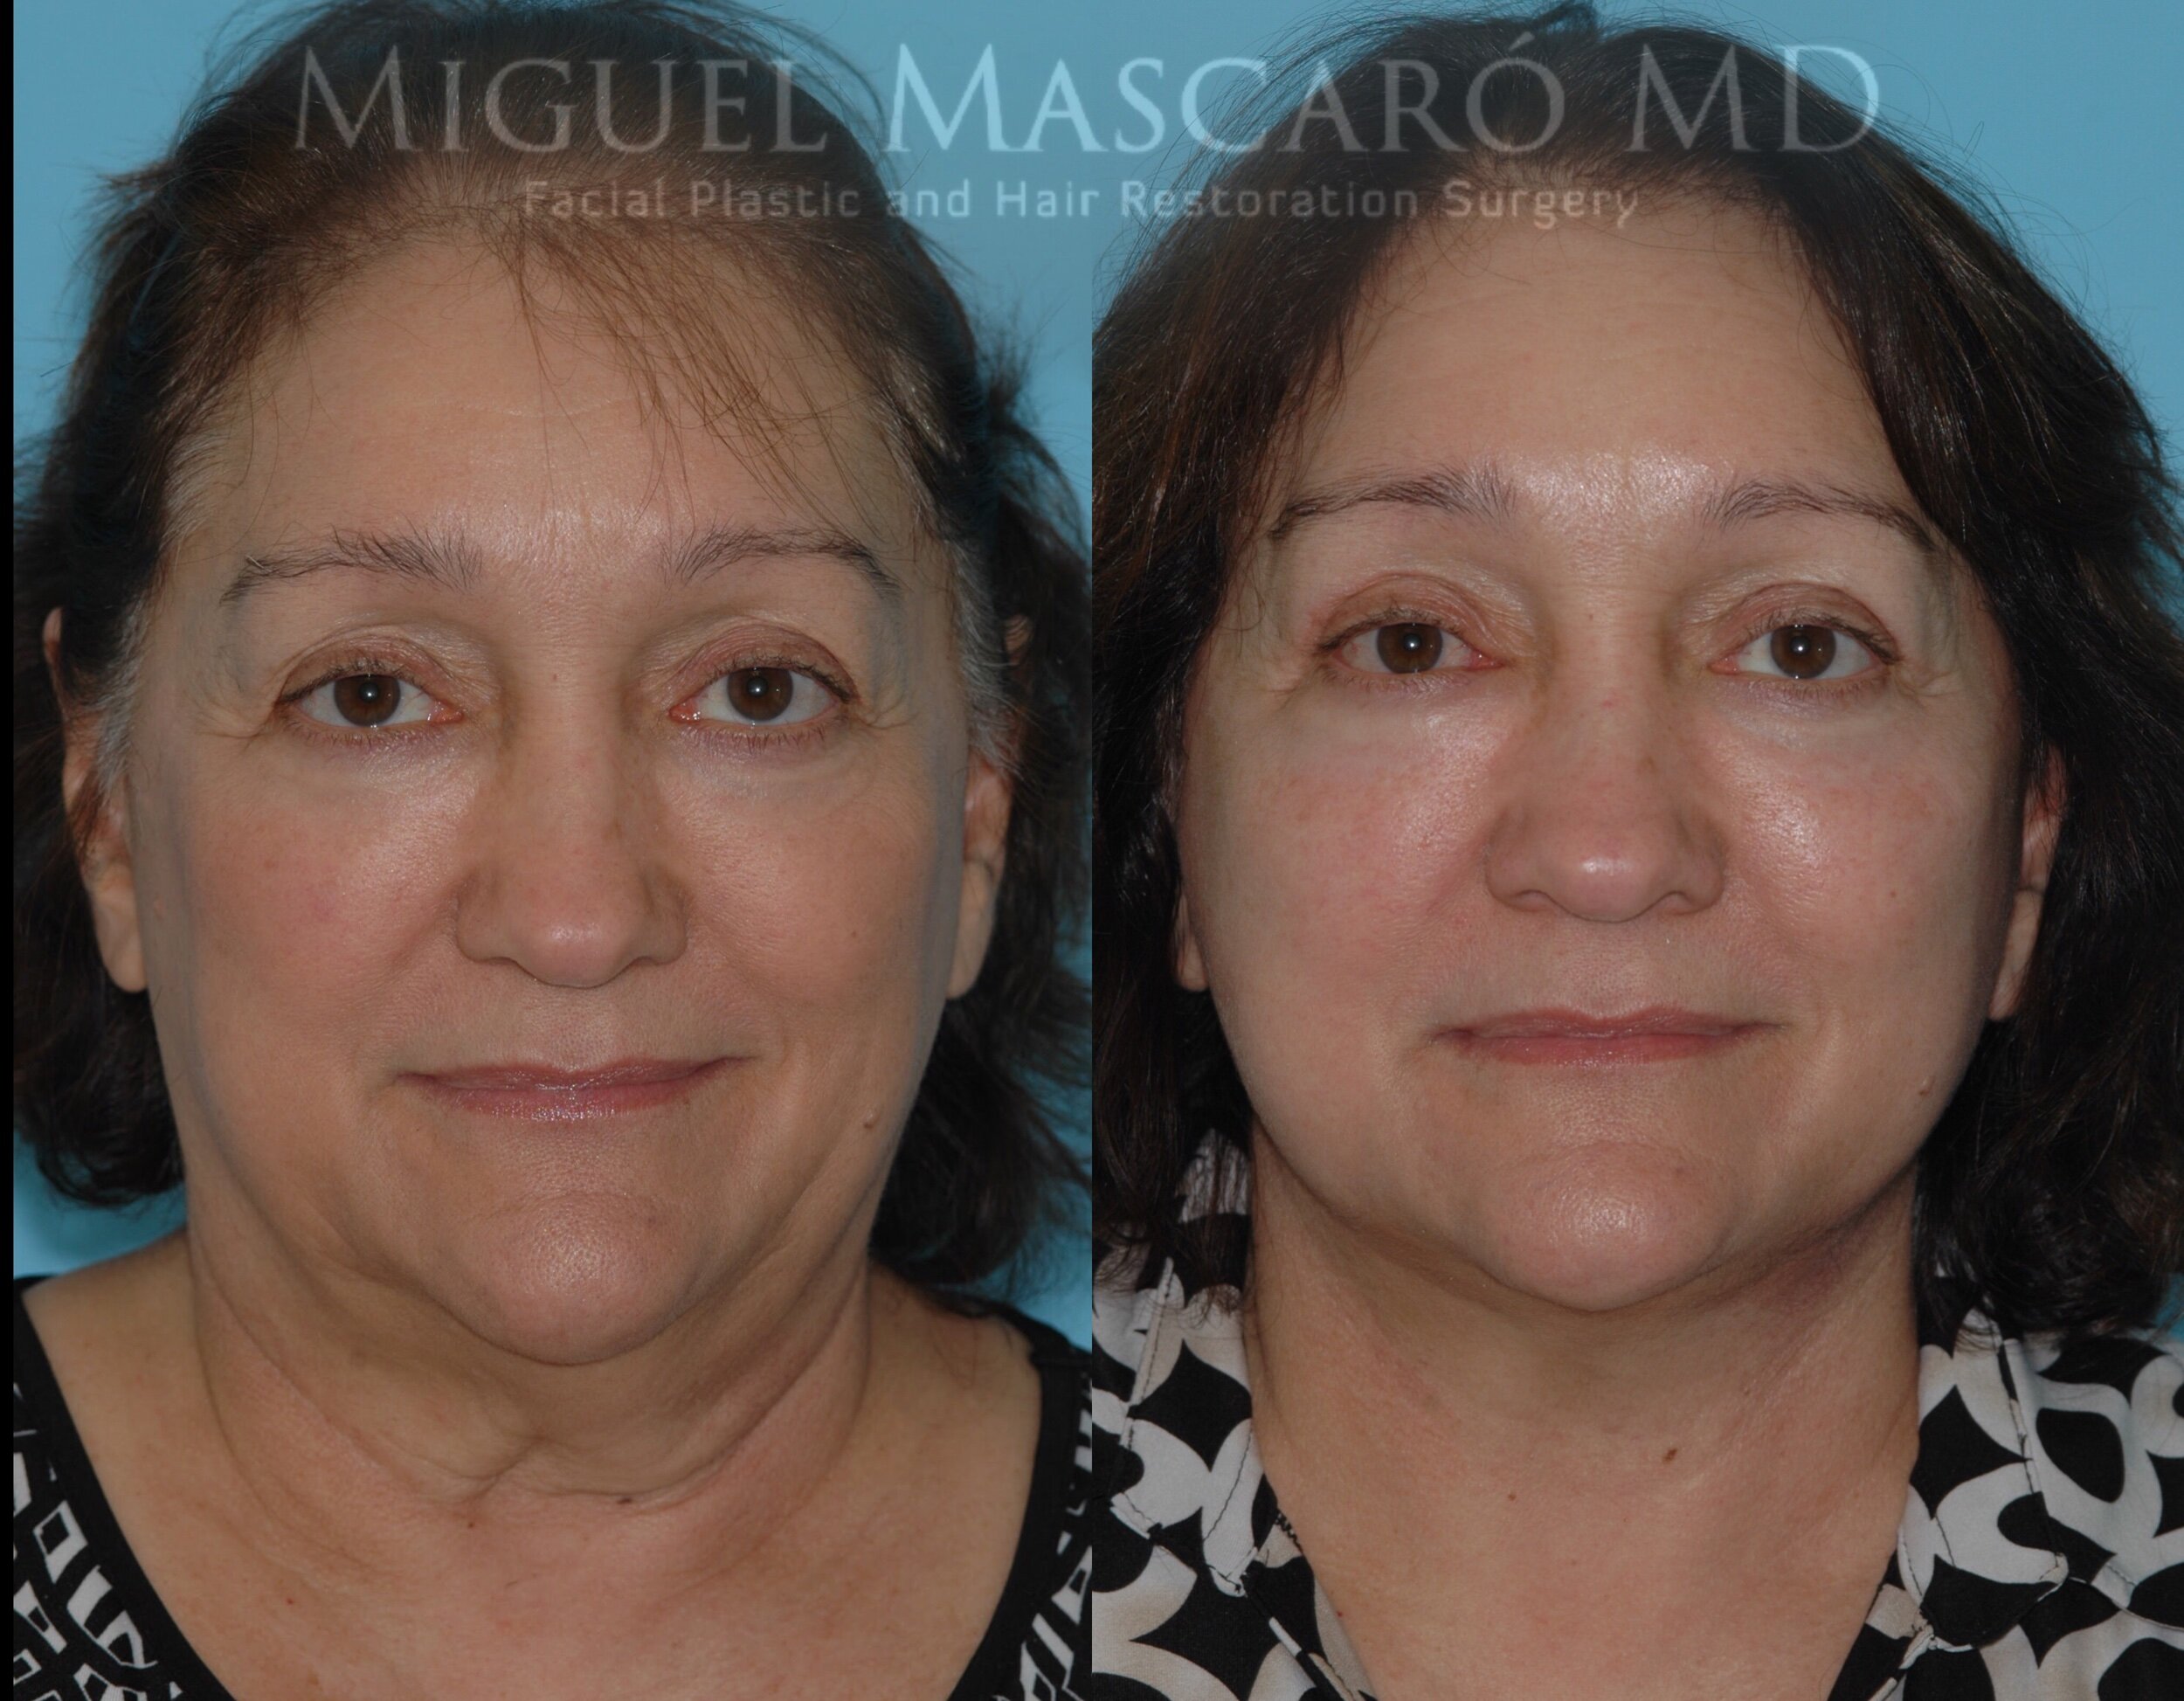  Deep plane facelift and liposuction  